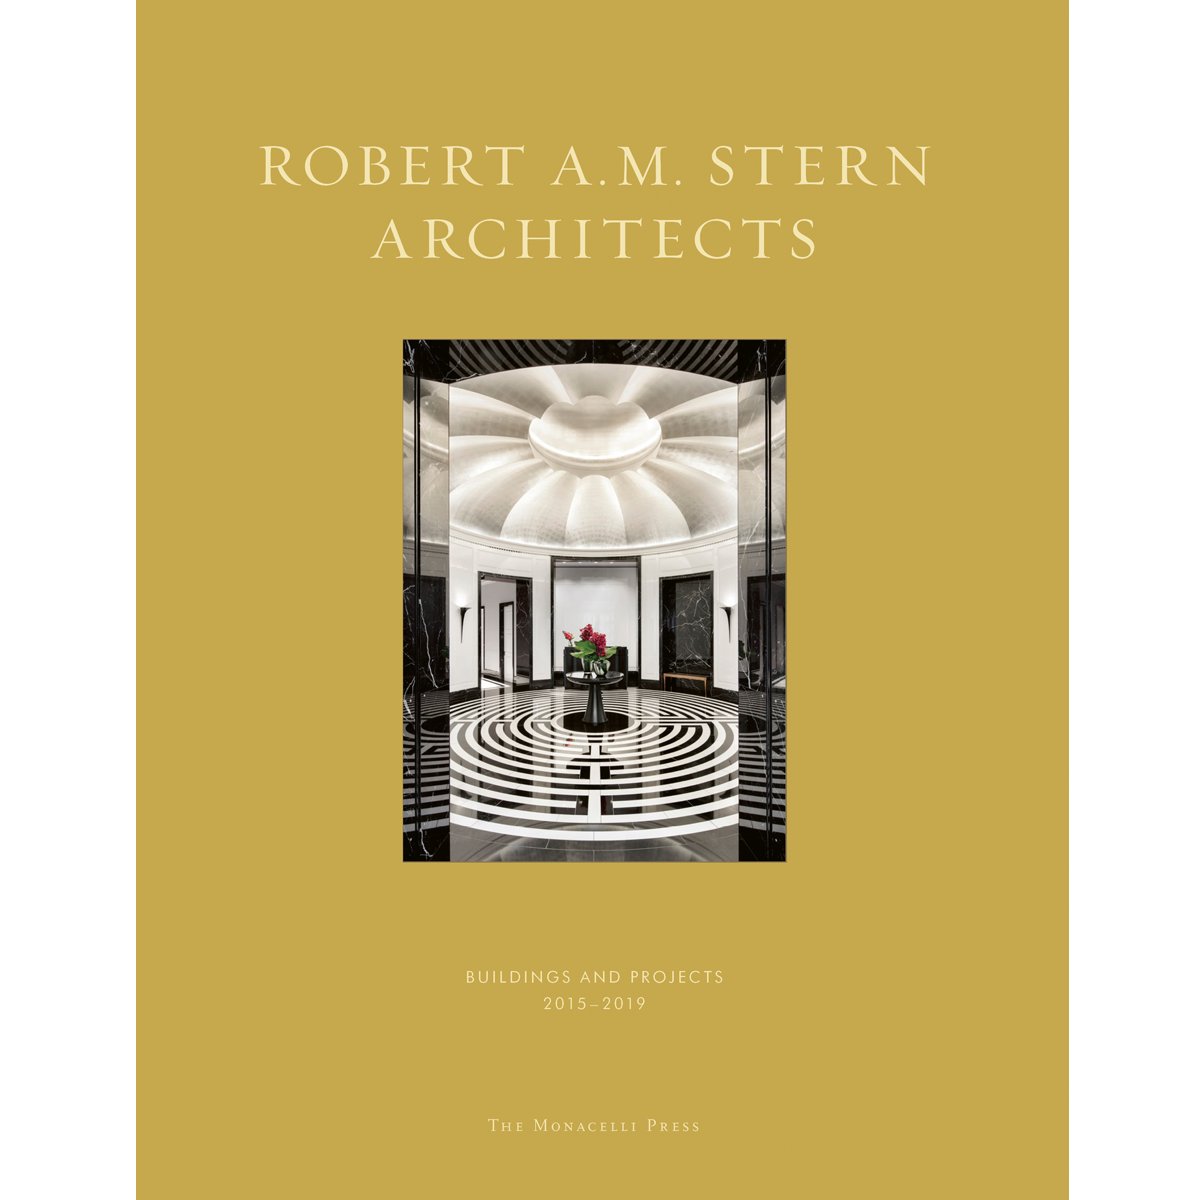 Robert A.M. Stern: Buildings and Projects: 2015-2019